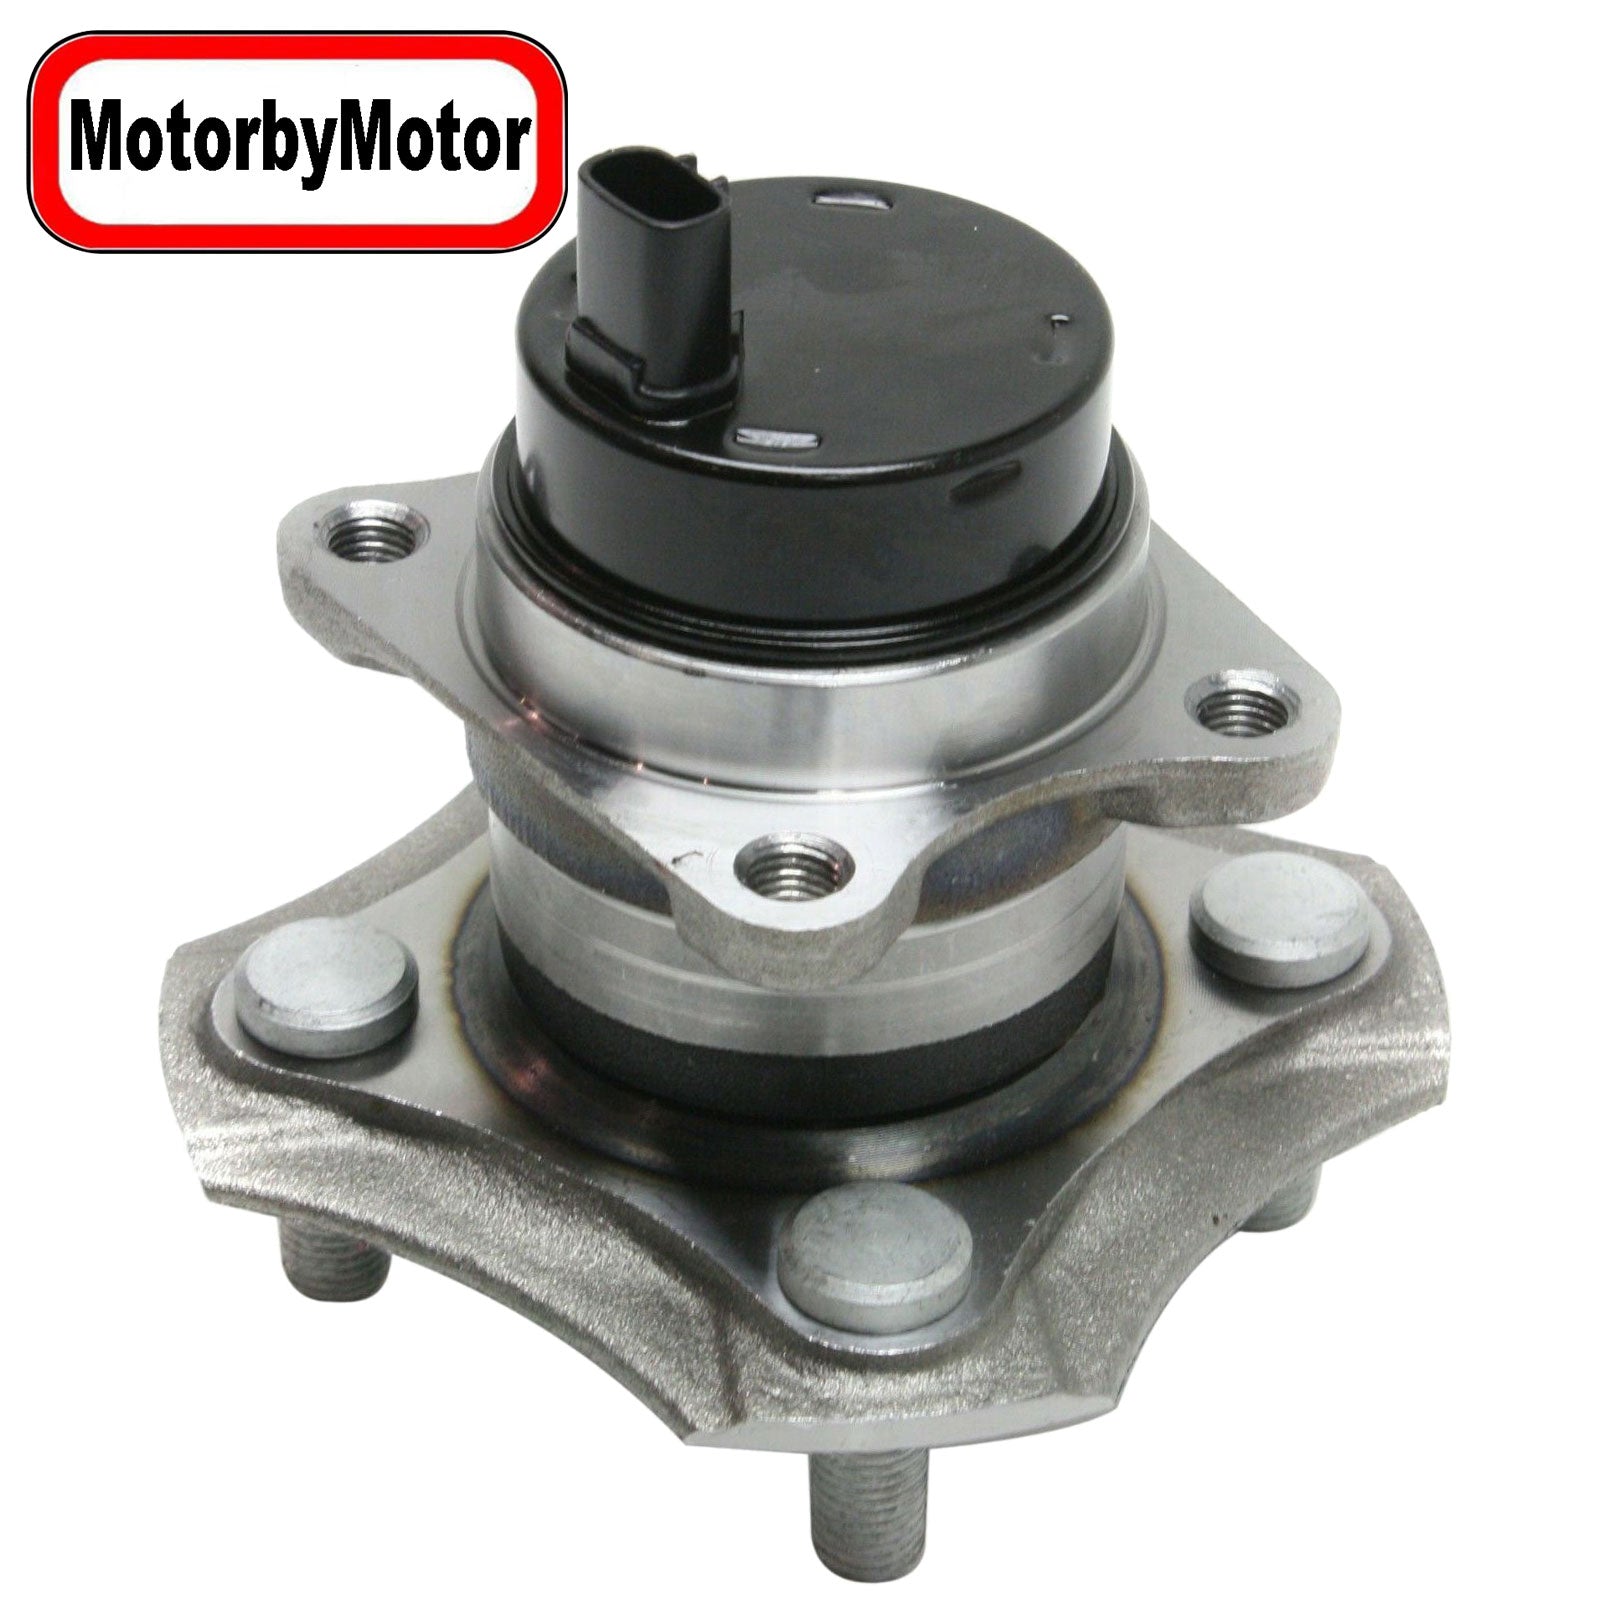 MotorbyMotor 512209 Rear Wheel Bearing Hub Assembly with 4 Lugs Scion XA XB 2004-2006, Toyota Echo 2000-2005 Low-Runout OE Directly Replacement (w/ABS) MotorbyMotor